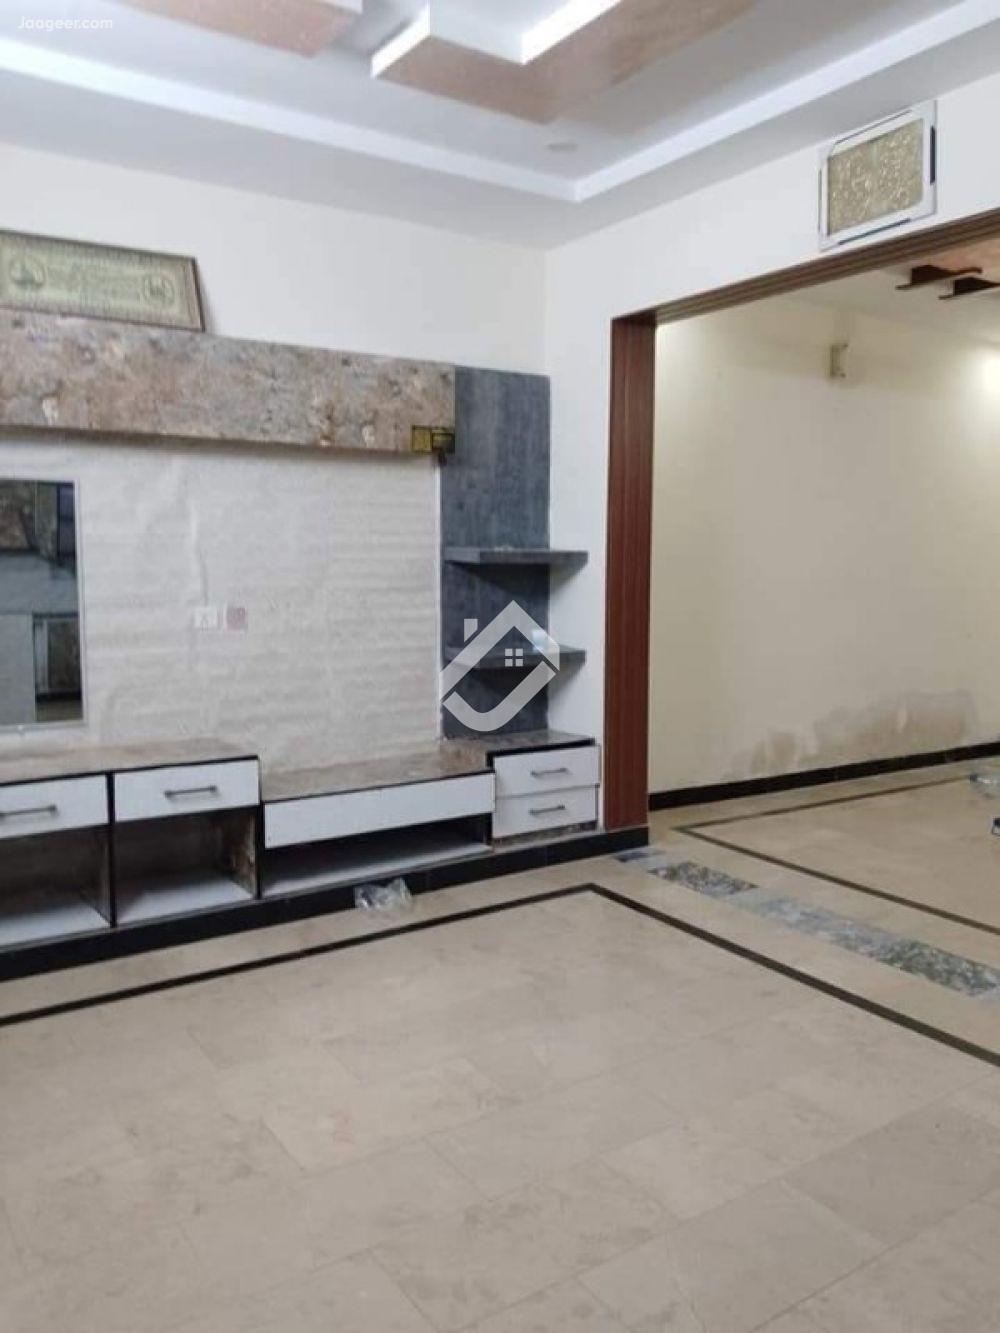 View  5 Marla Double Storey House For Rent In Ghauri Town  in Ghauri Town, Islamabad